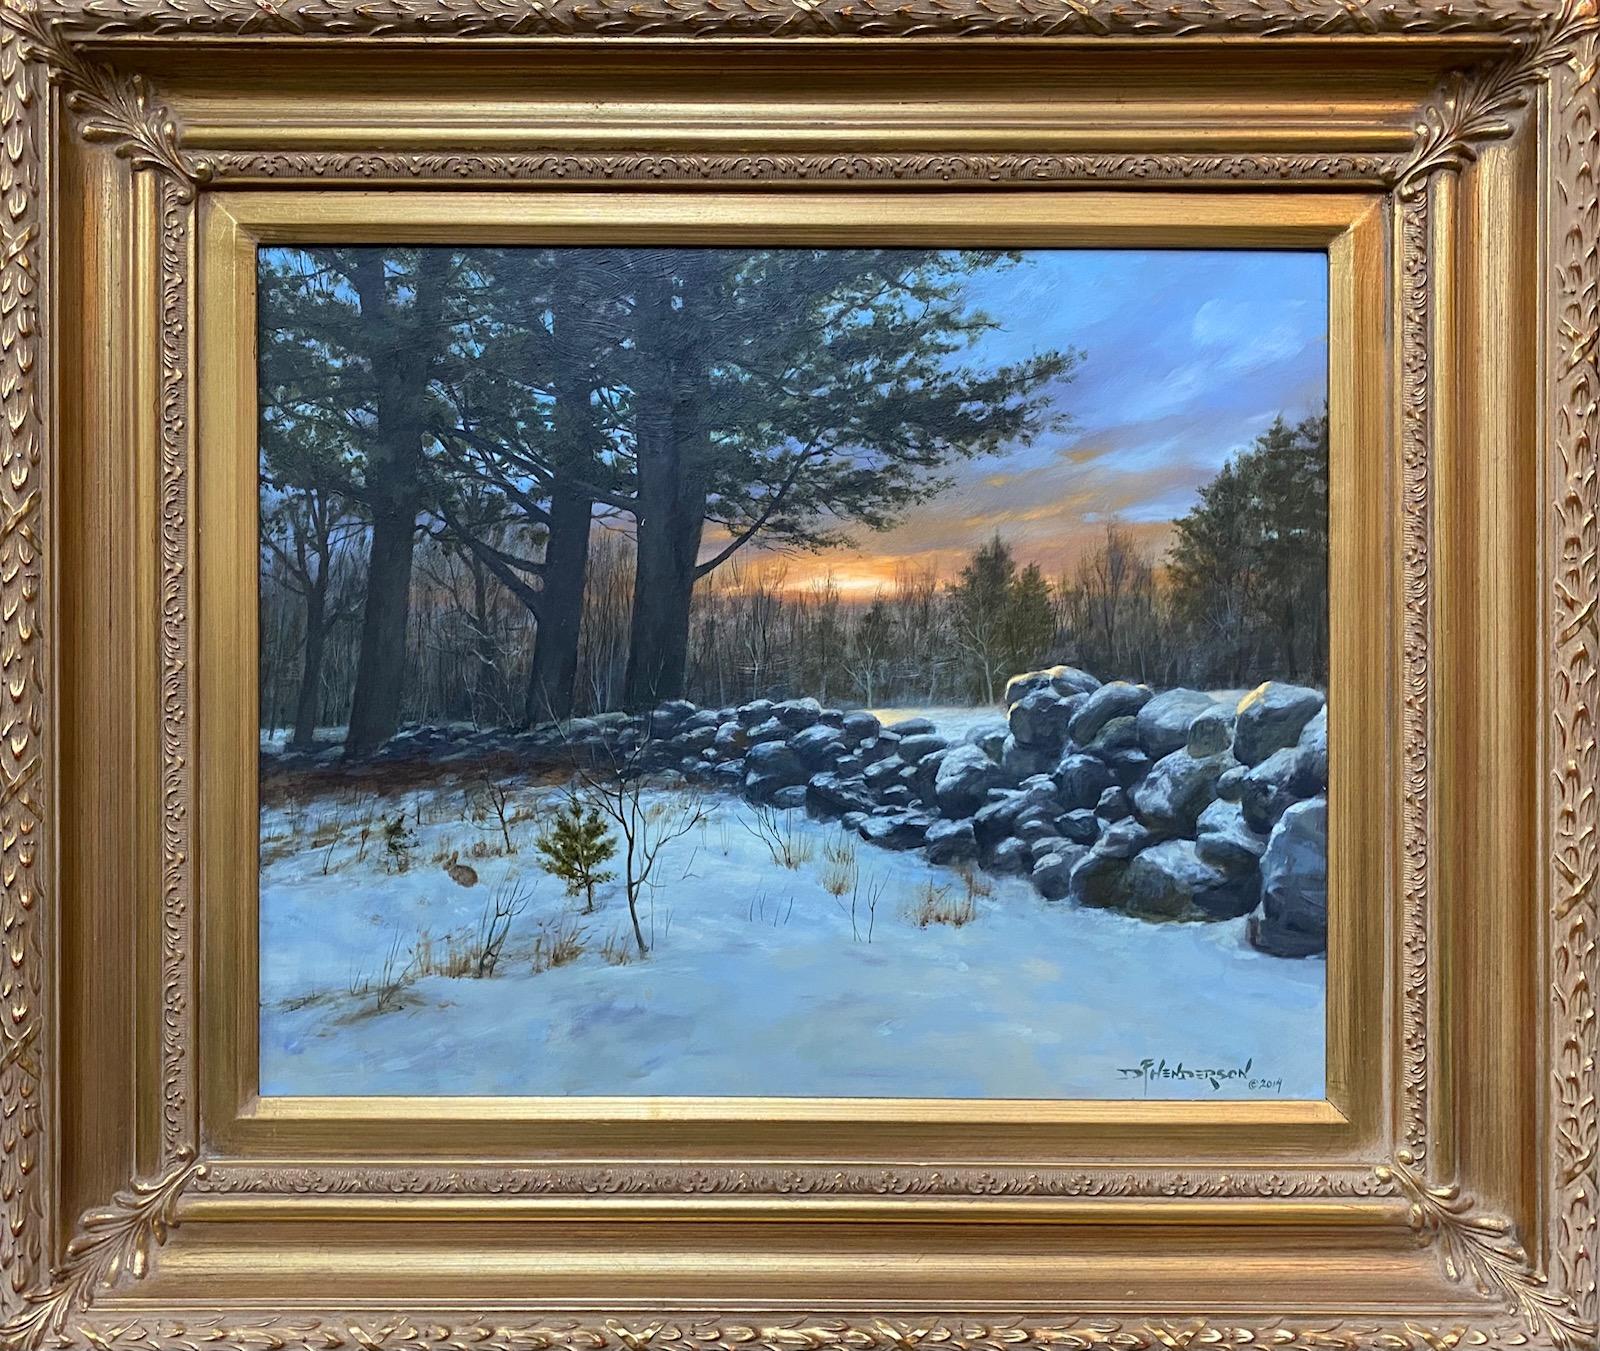 Winter in New England, original realist landscape - Painting by David F. Henderson